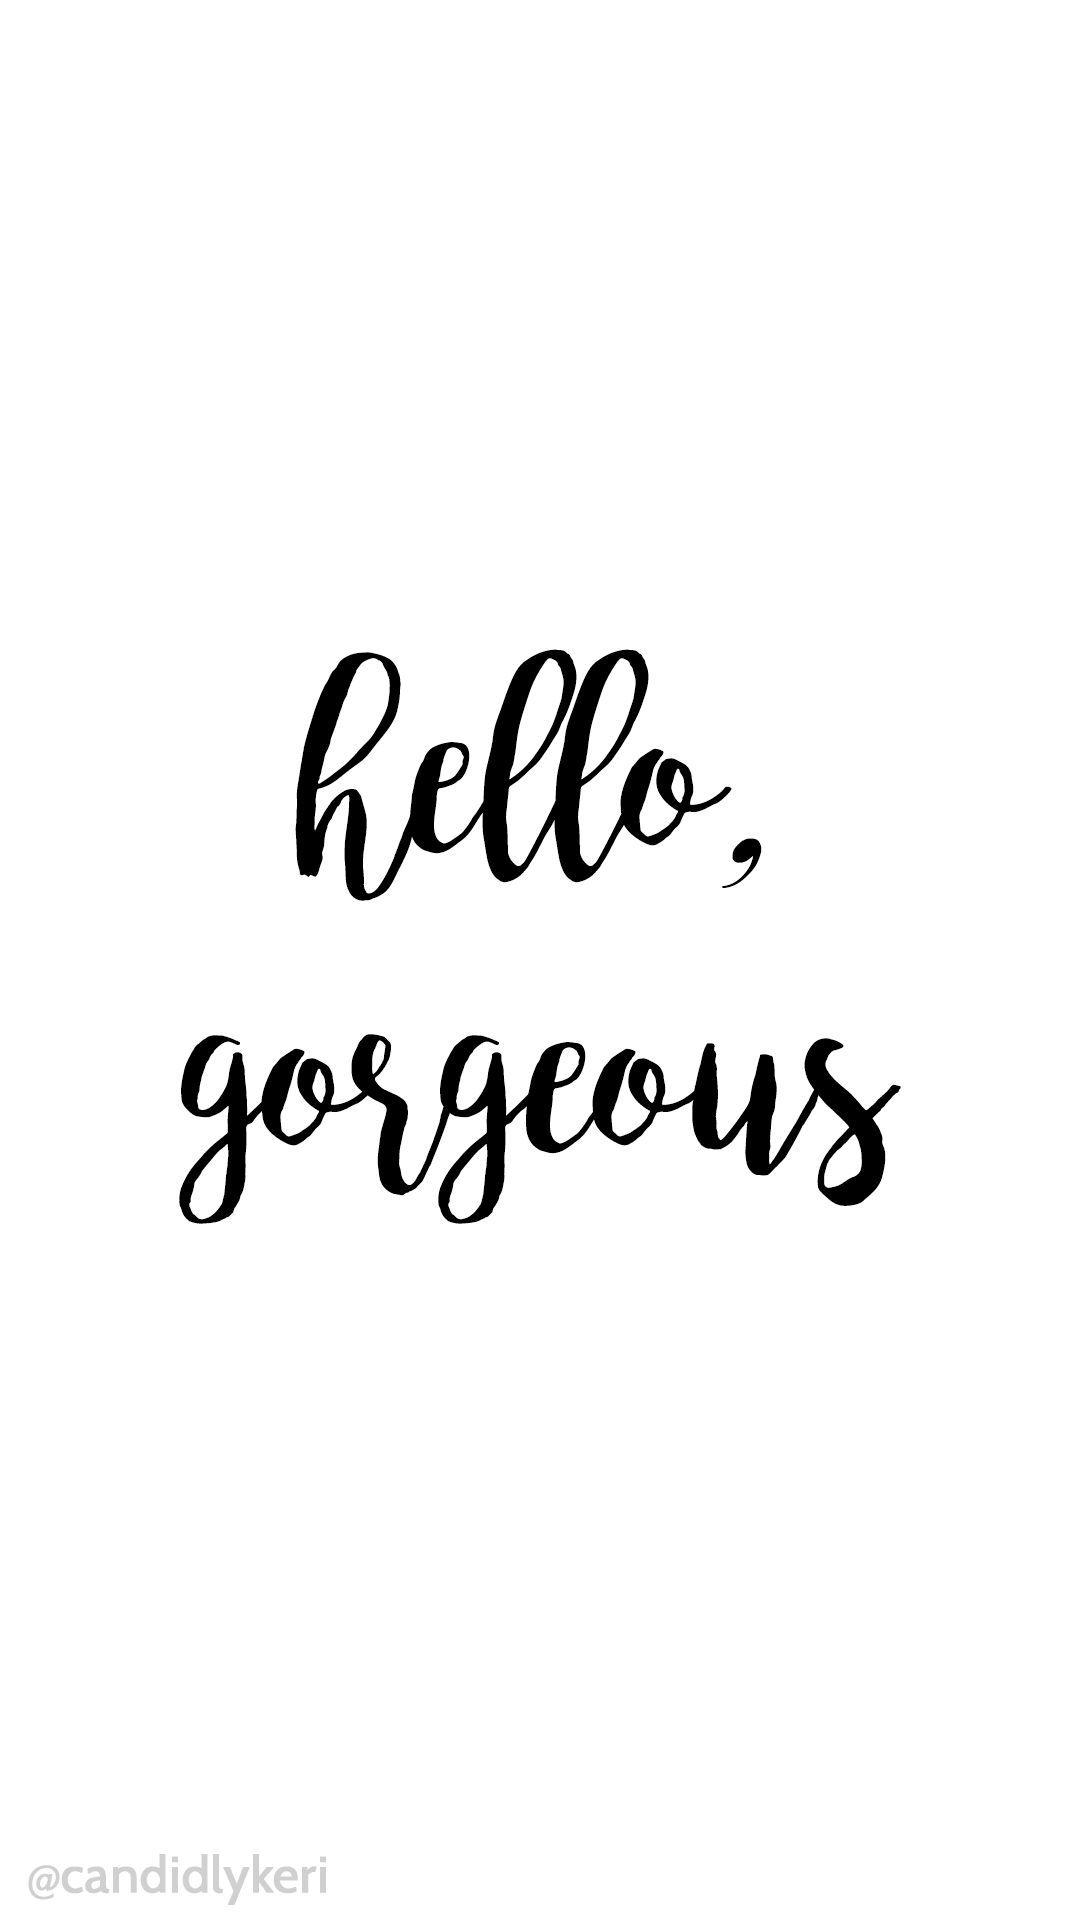 Hello Gorgeous simple script black and white wallpaper background iphone, android,. White wallpaper, White wallpaper for iphone, Black and white wallpaper iphone